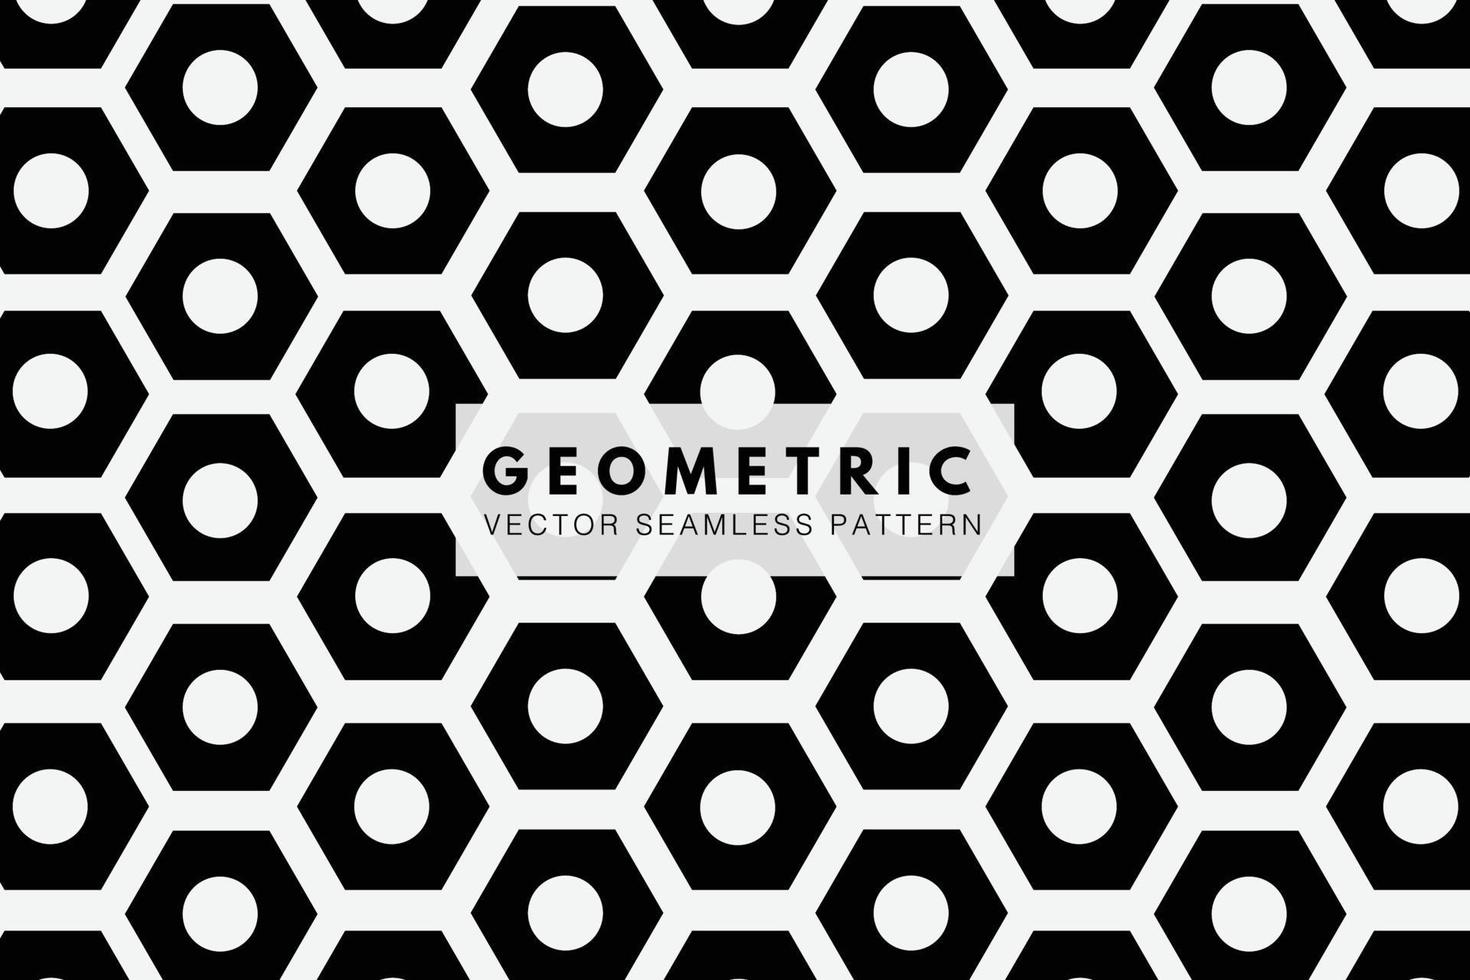 Hexagon polygon shape with circles geometric shapes. Vector seamless repeat pattern